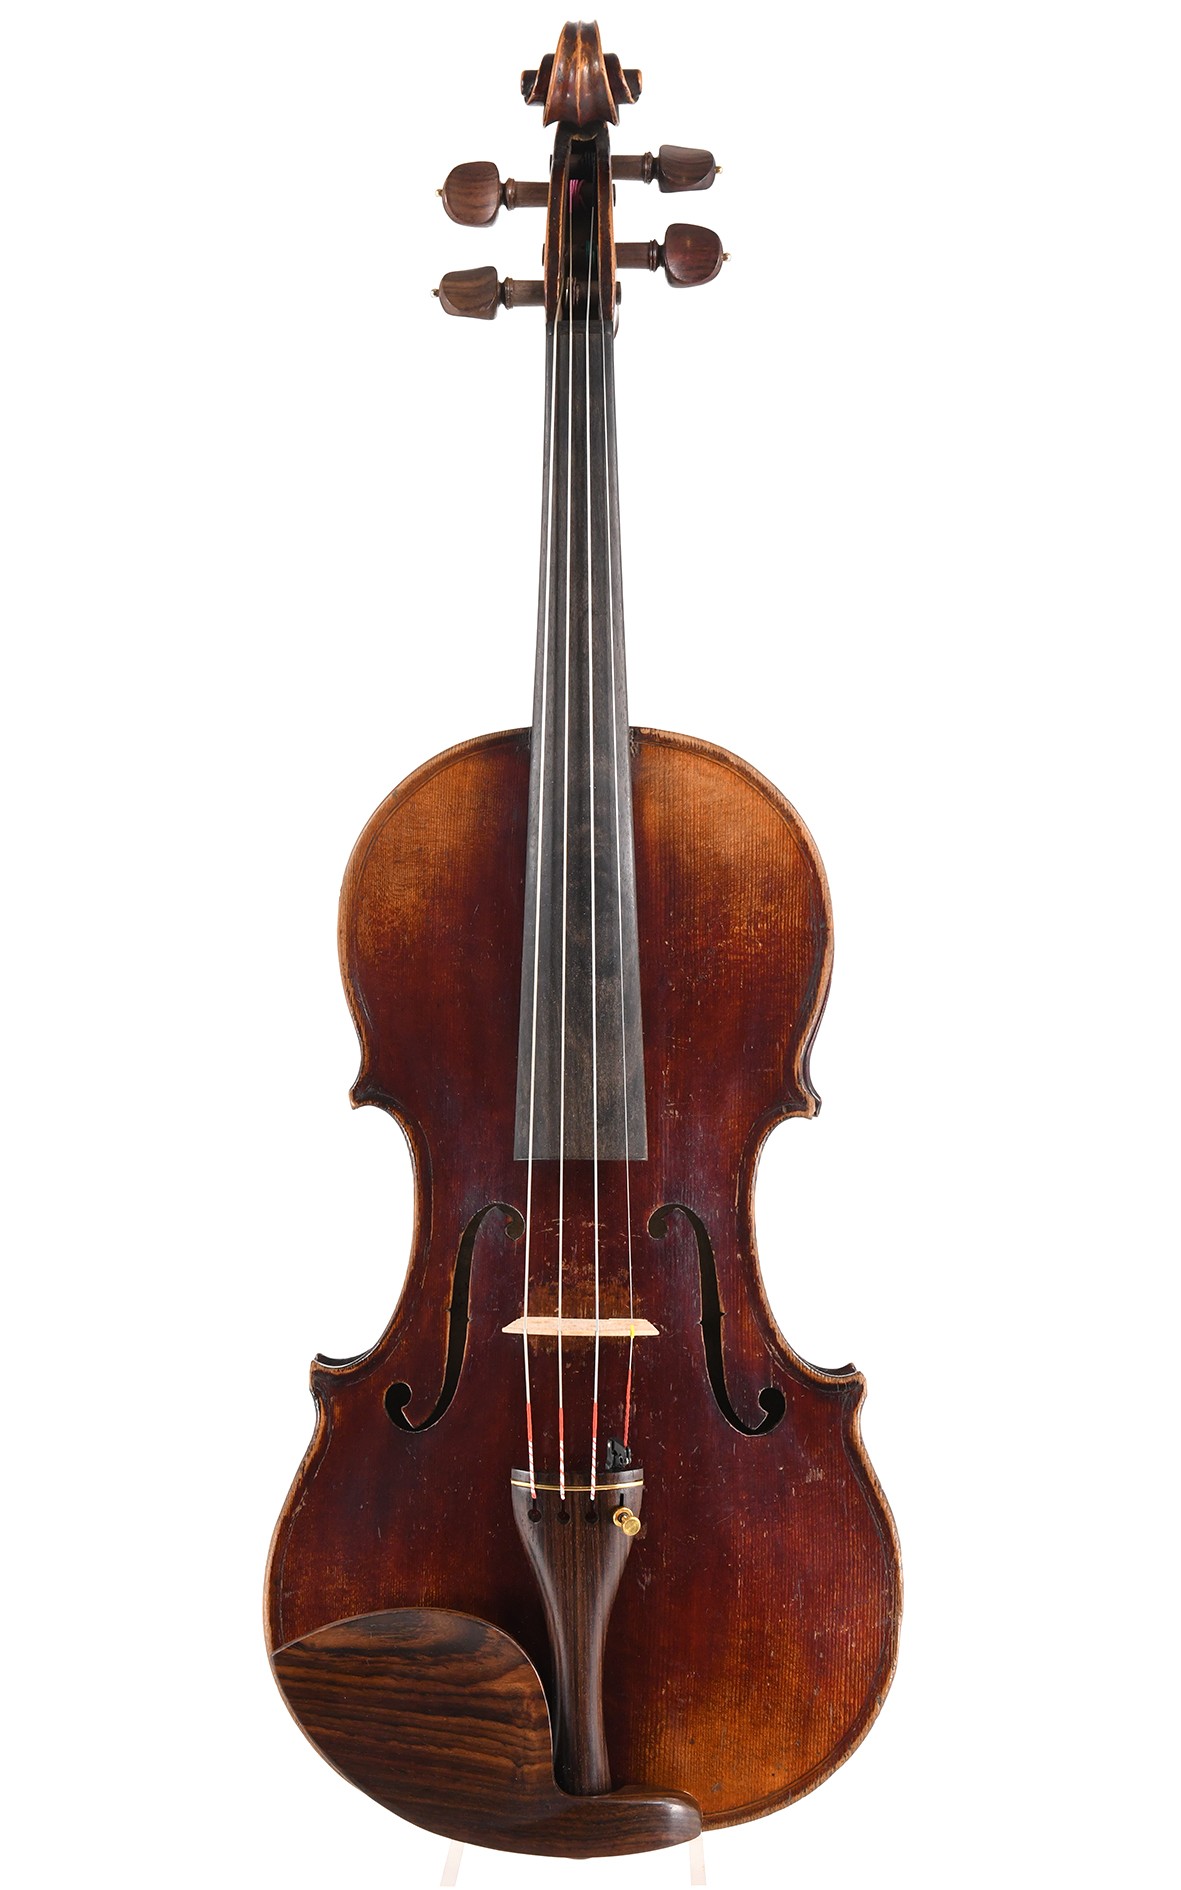 19th century violin from Mittenwald, approx. 1830